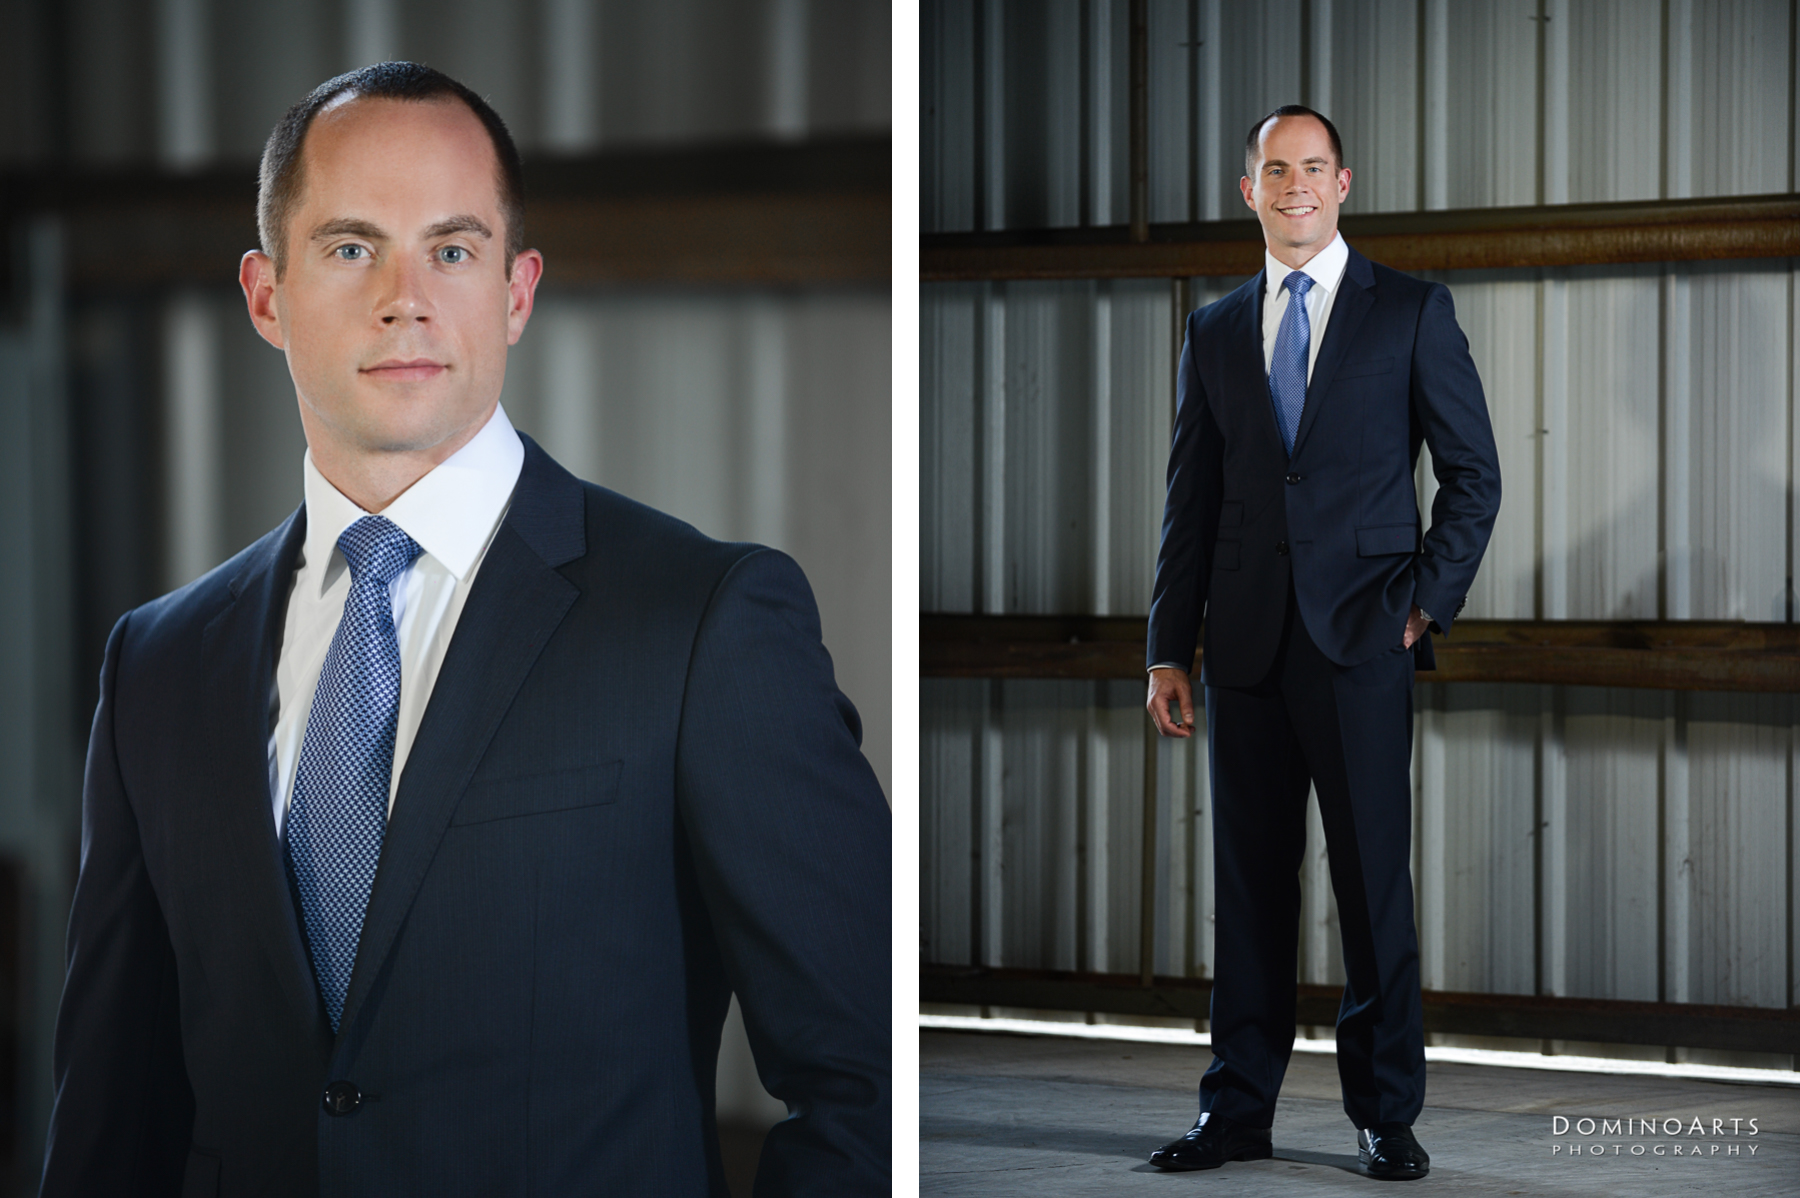 Professional Attorney Team and Headshots Photography in South Florida by Domino Arts